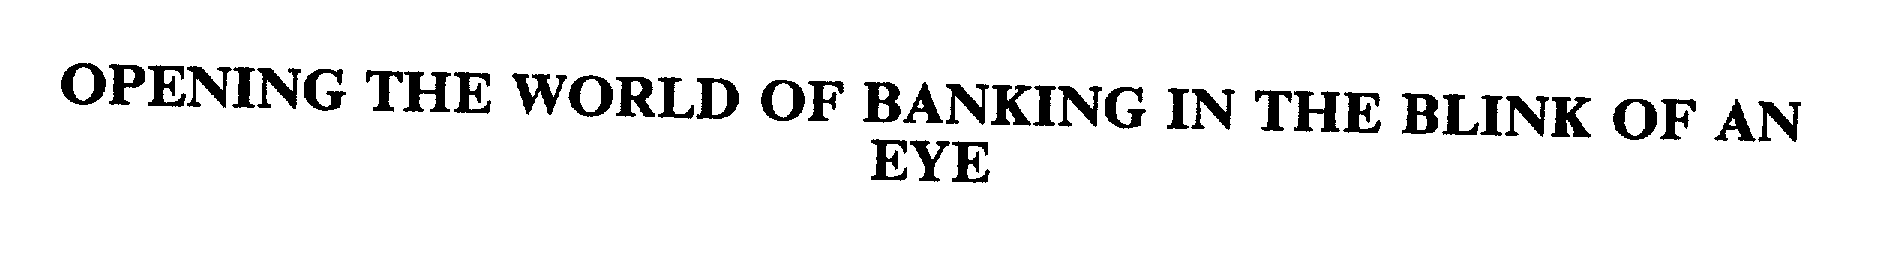  OPENING THE WORLD OF BANKING IN THE BLINK OF AN EYE